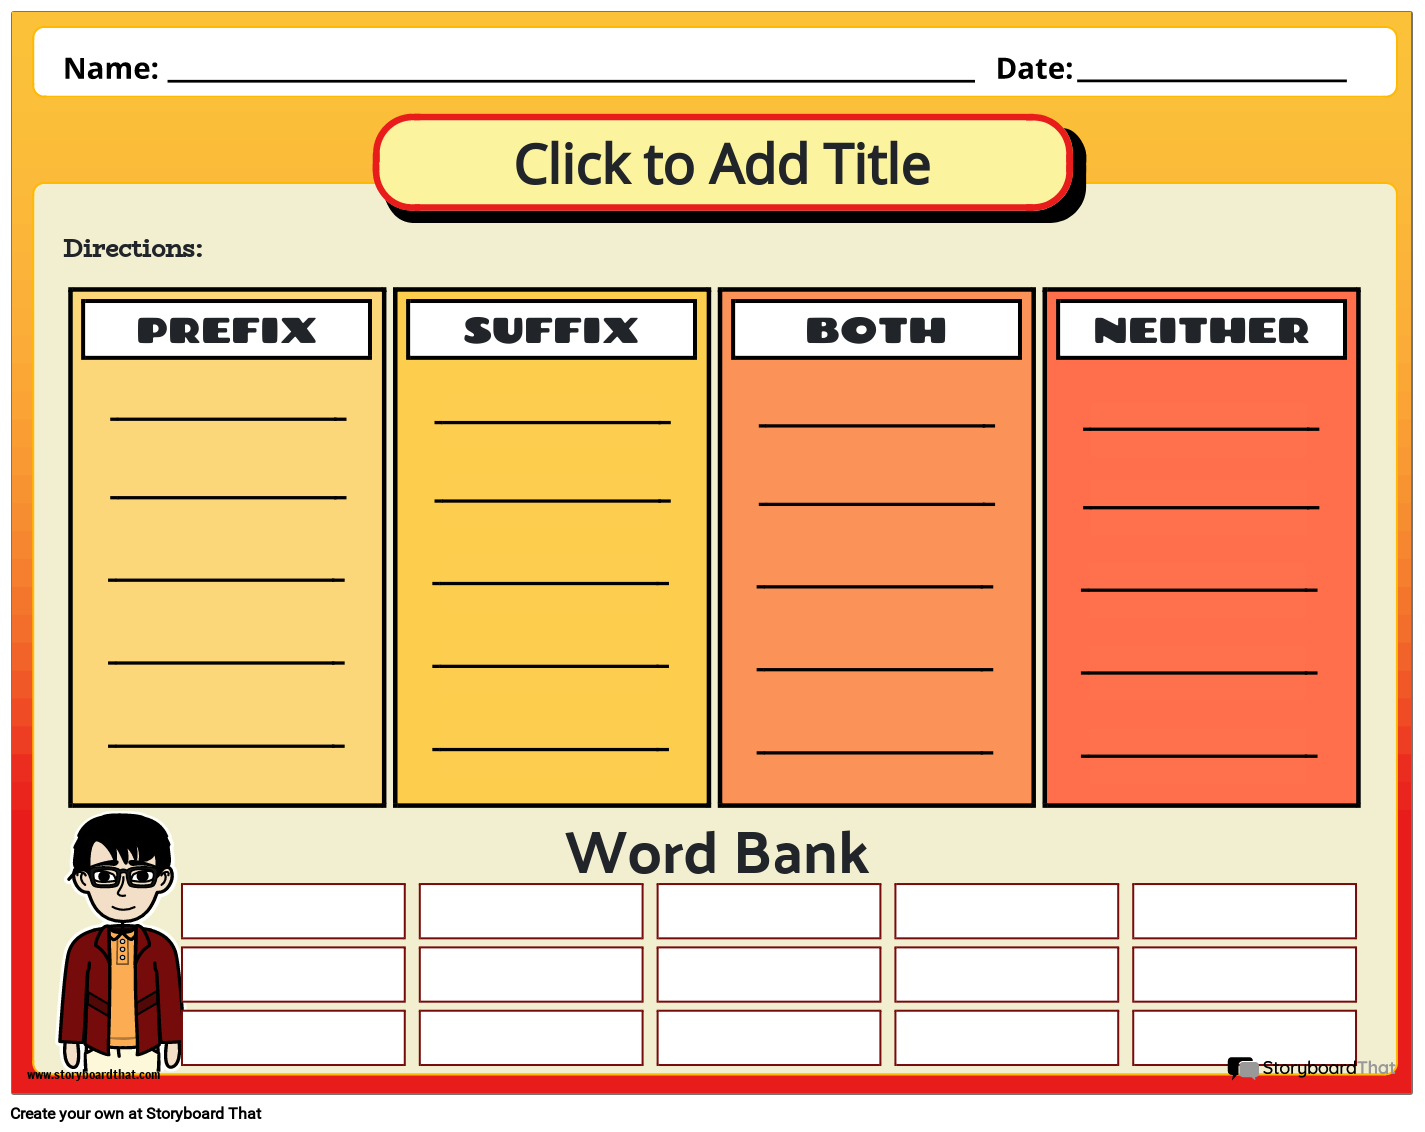 Sort It - Words with Prefix and Suffix Worksheet